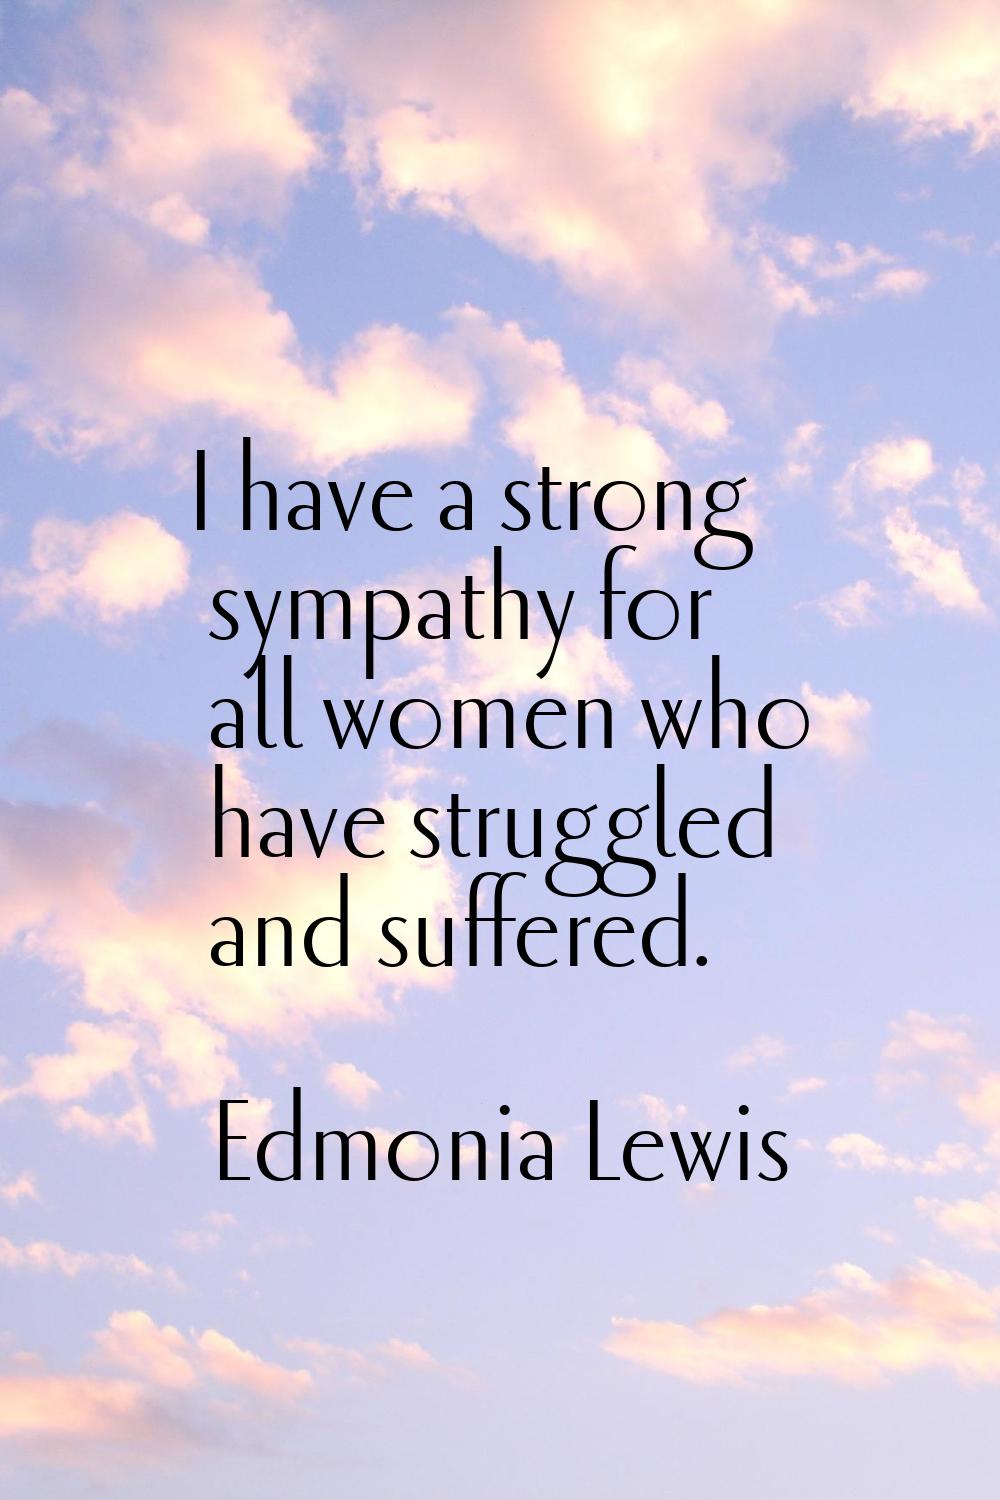 I have a strong sympathy for all women who have struggled and suffered.